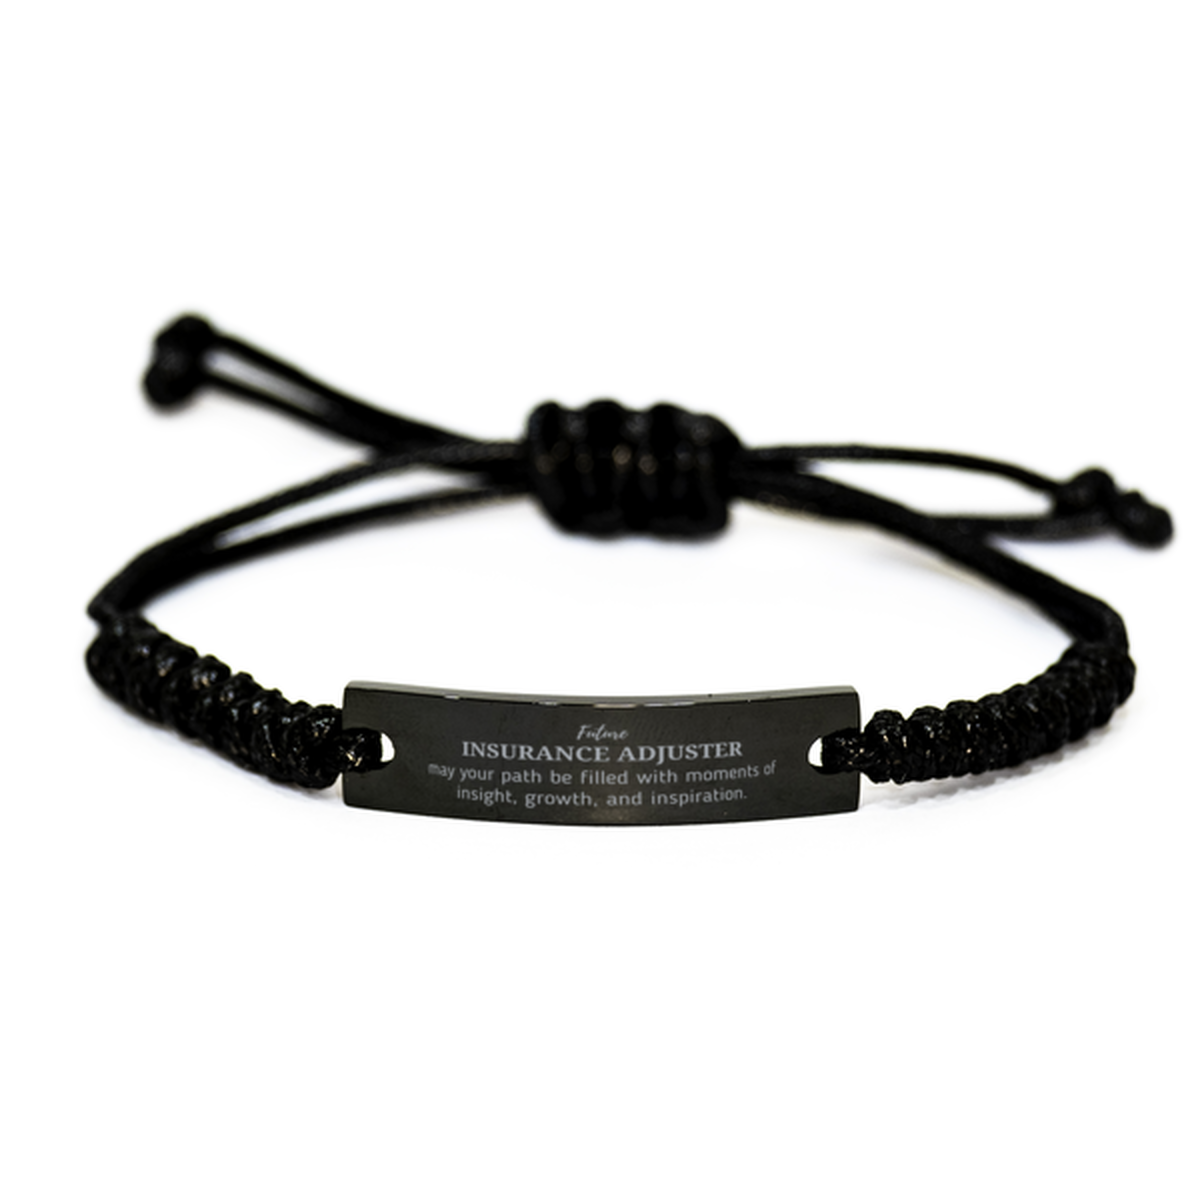 Future Insurance Adjuster Gifts, May your path be filled with moments of insight, Graduation Gifts for New Insurance Adjuster, Christmas Unique Black Rope Bracelet For Men, Women, Friends